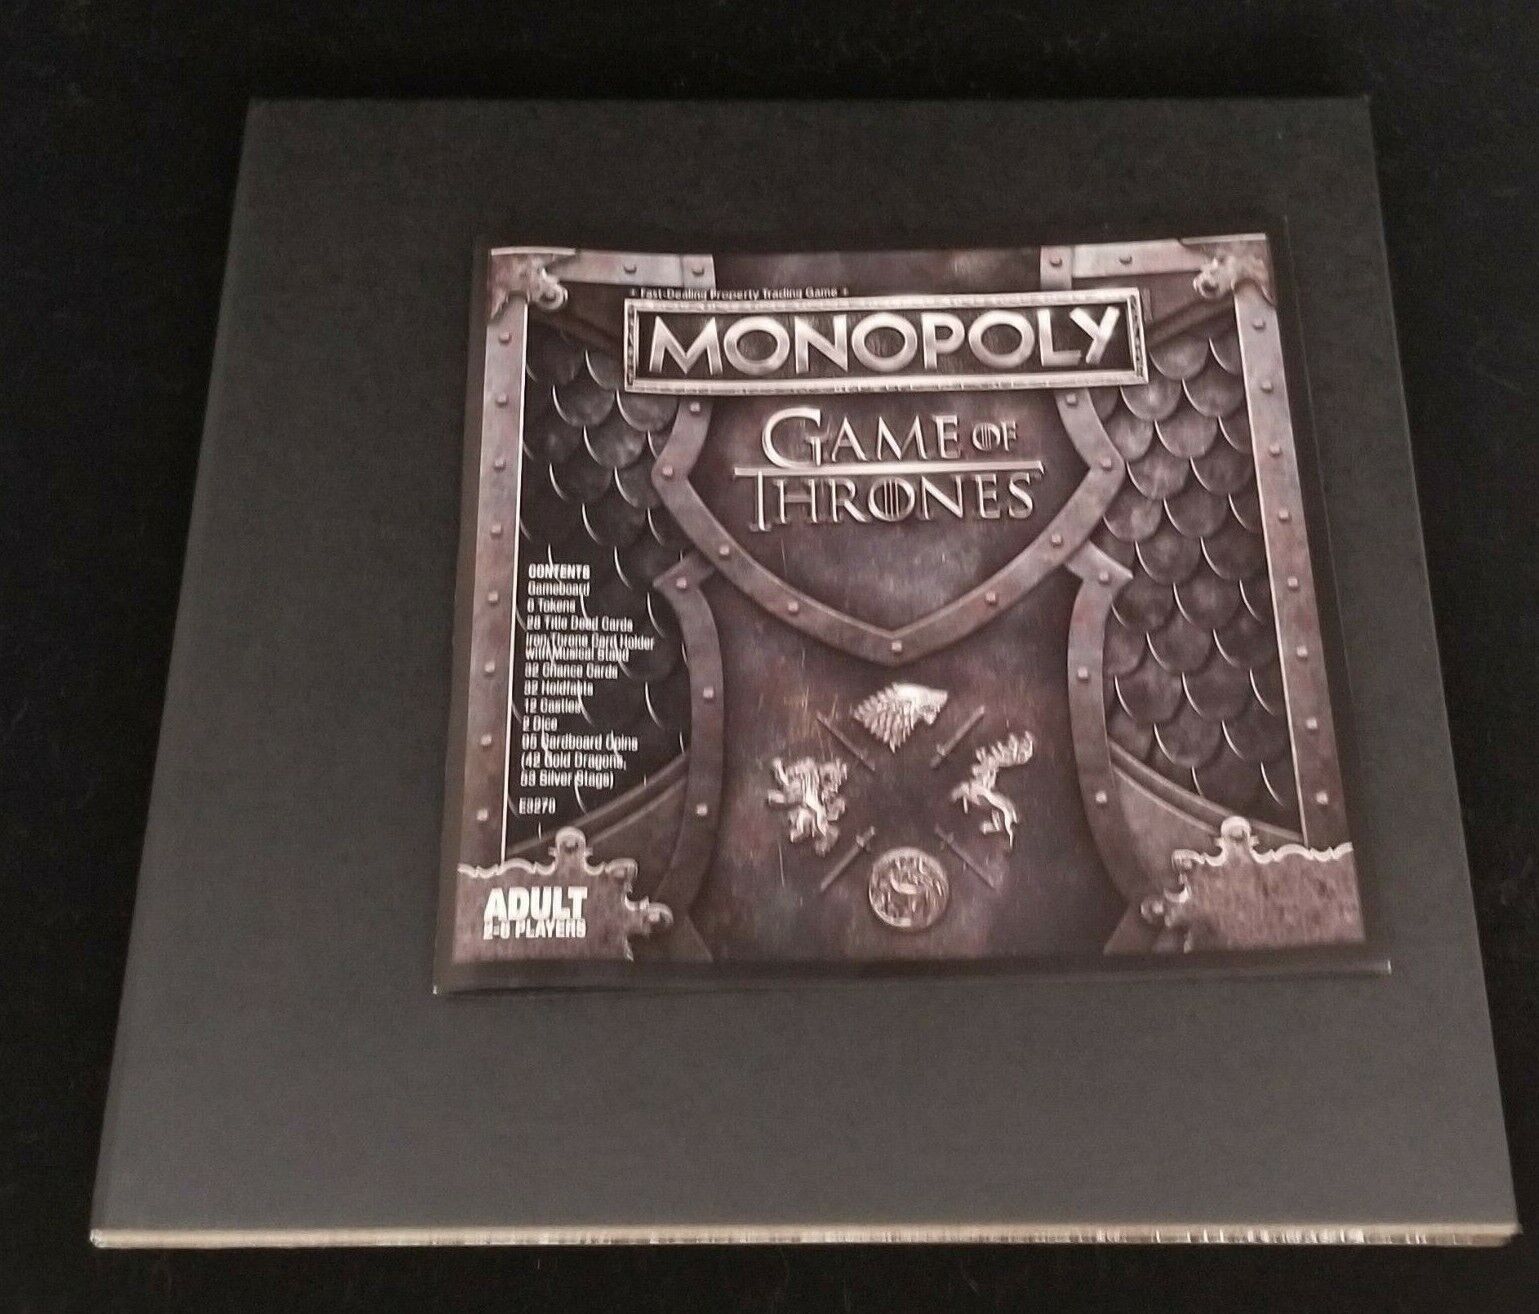 Monopoly Game Of Thrones Adult Board Game Replacement Pieces Tokens Cards Board 